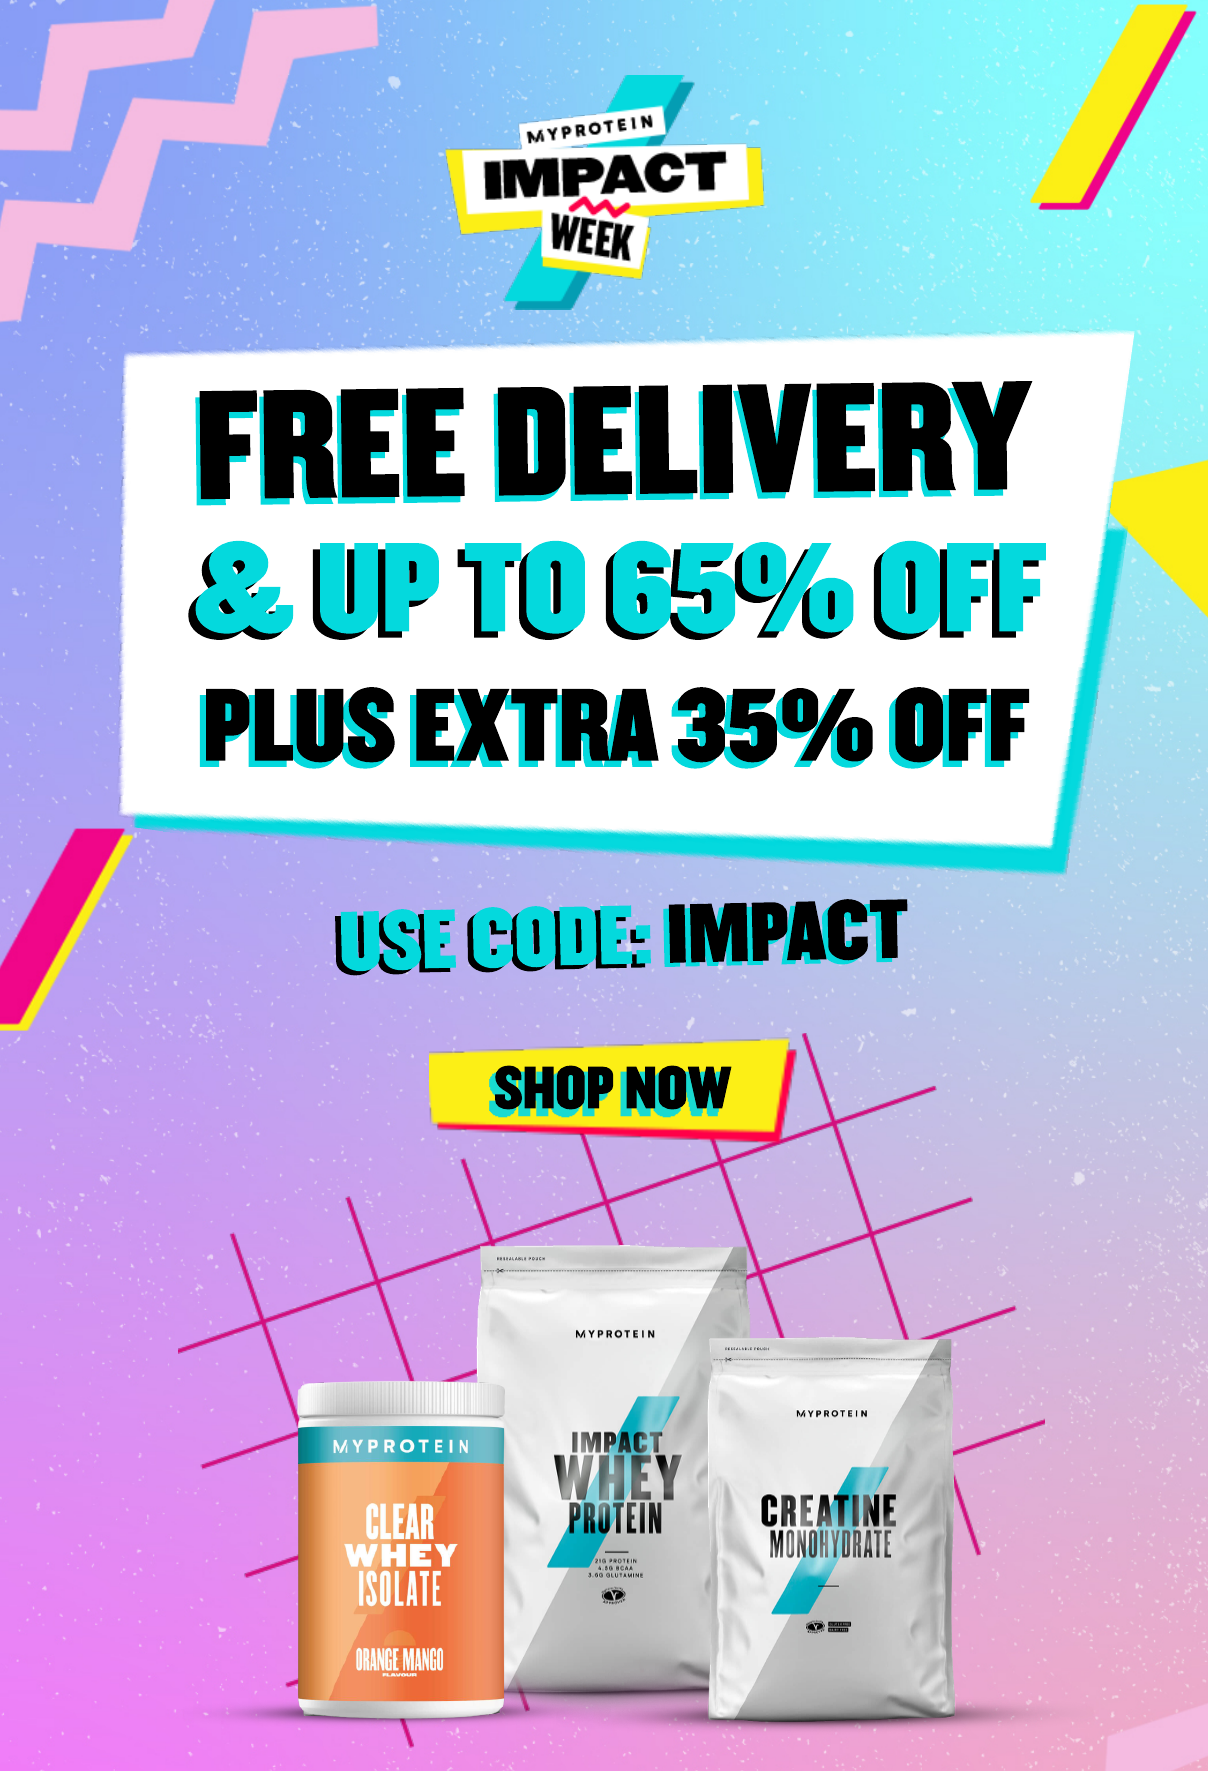 Up to 65% off + FREE Delivery